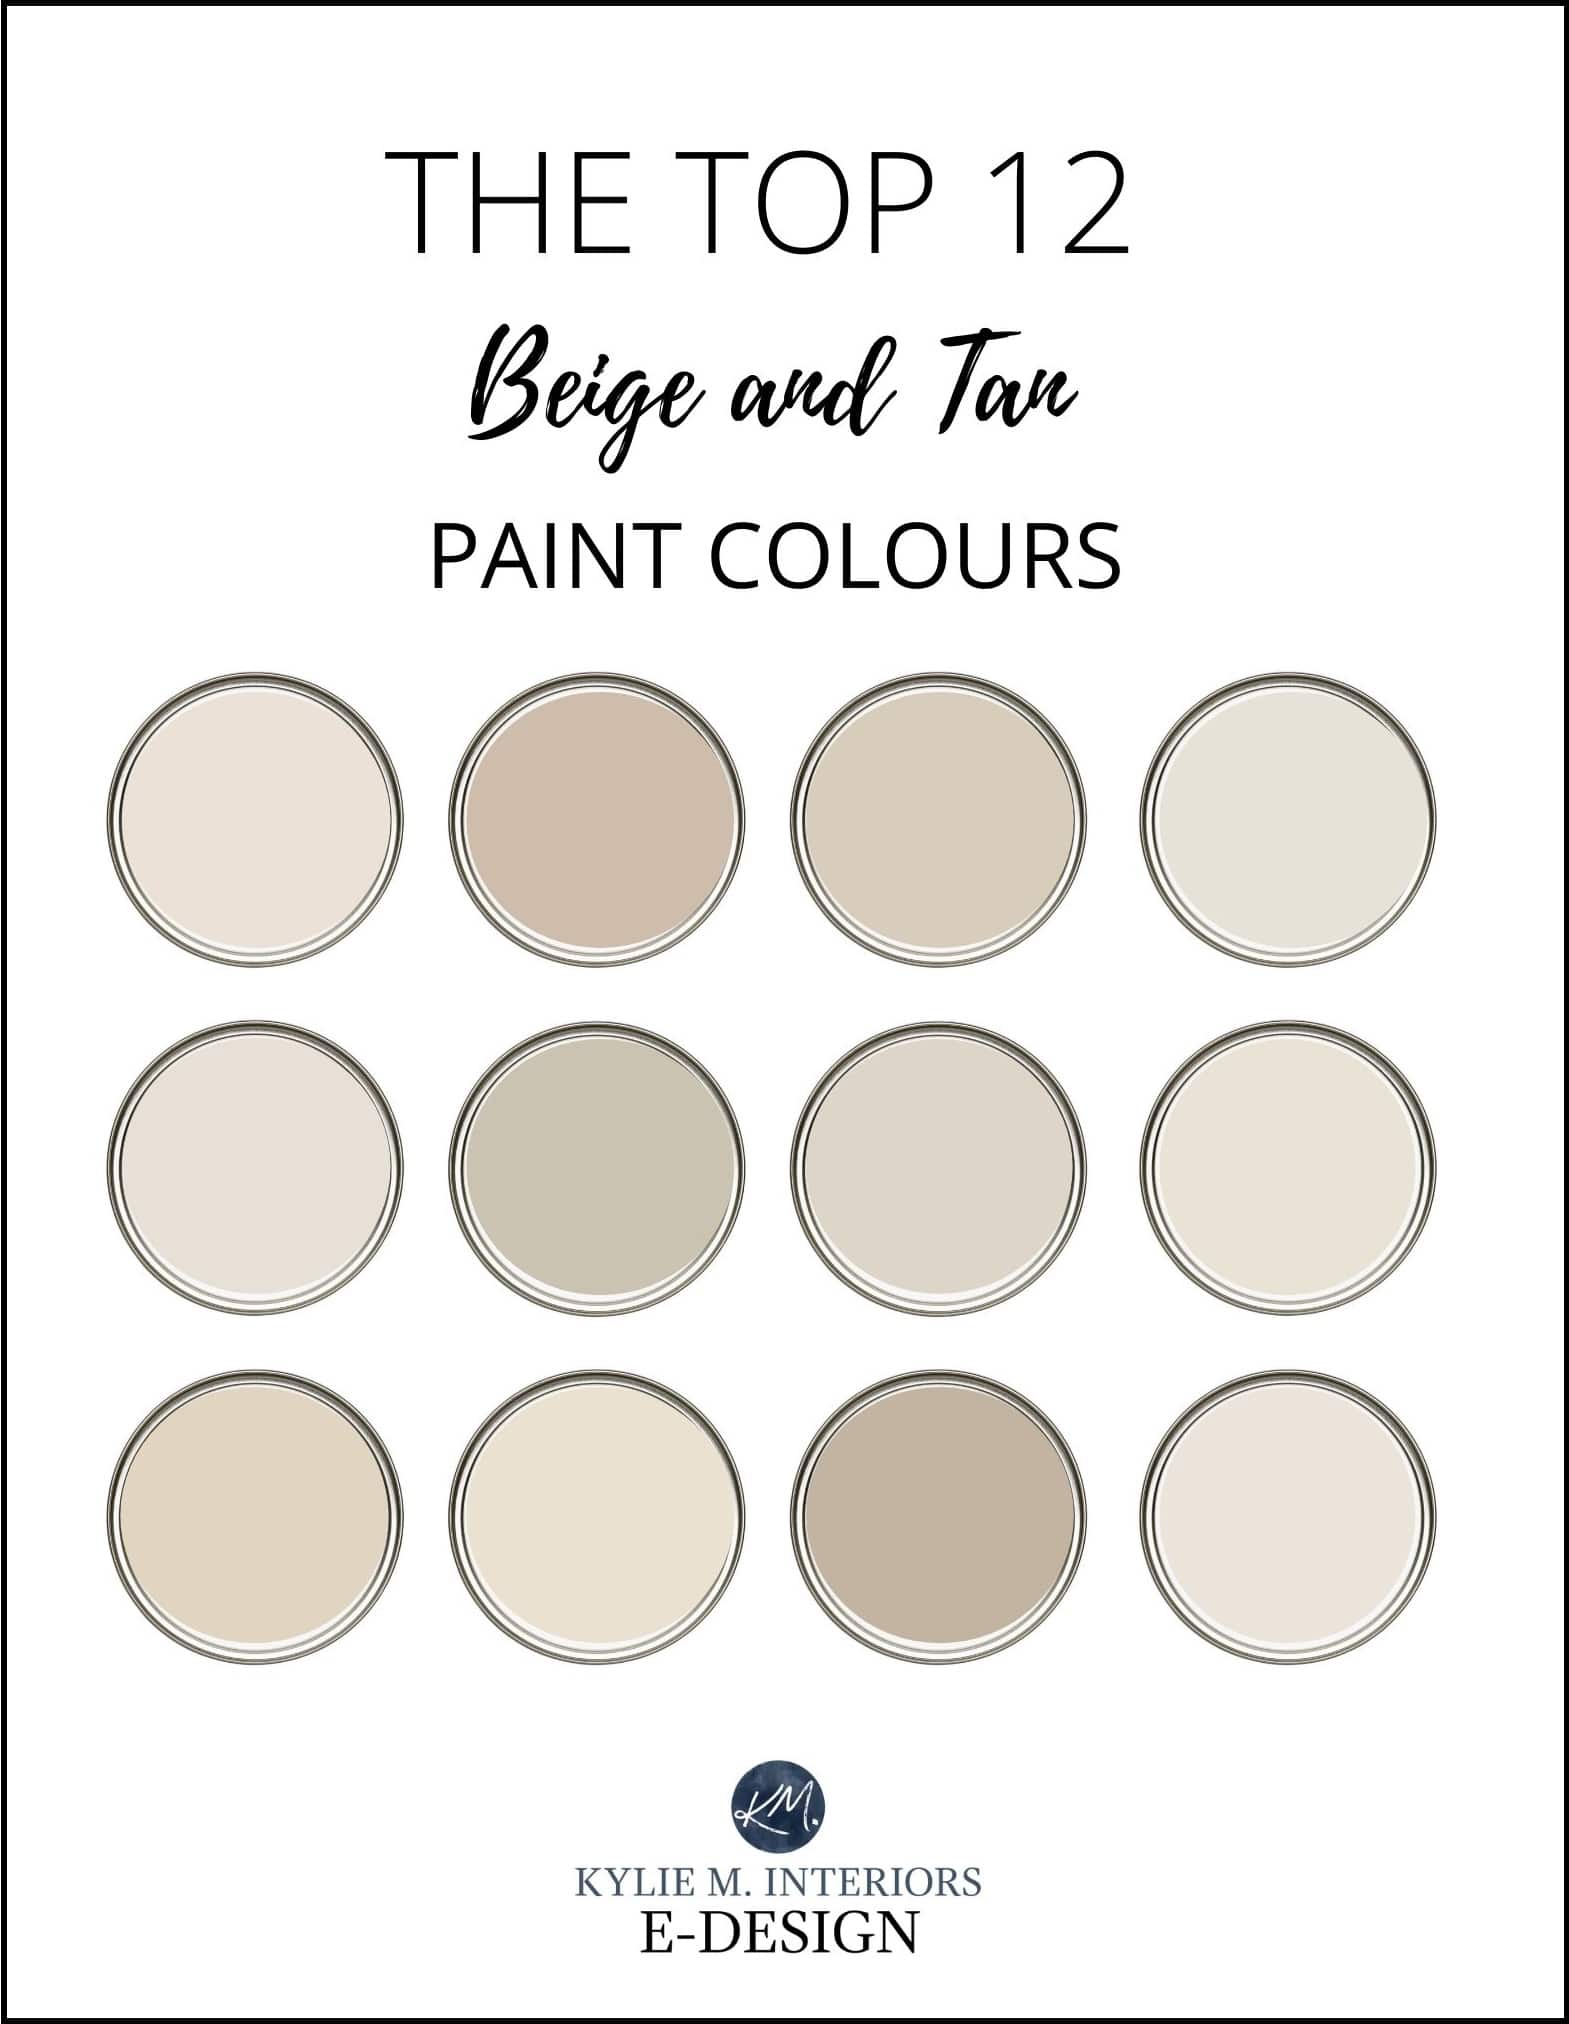 The 25 MOST POPULAR Beige and Tan Paint Colours   Kylie M Interiors